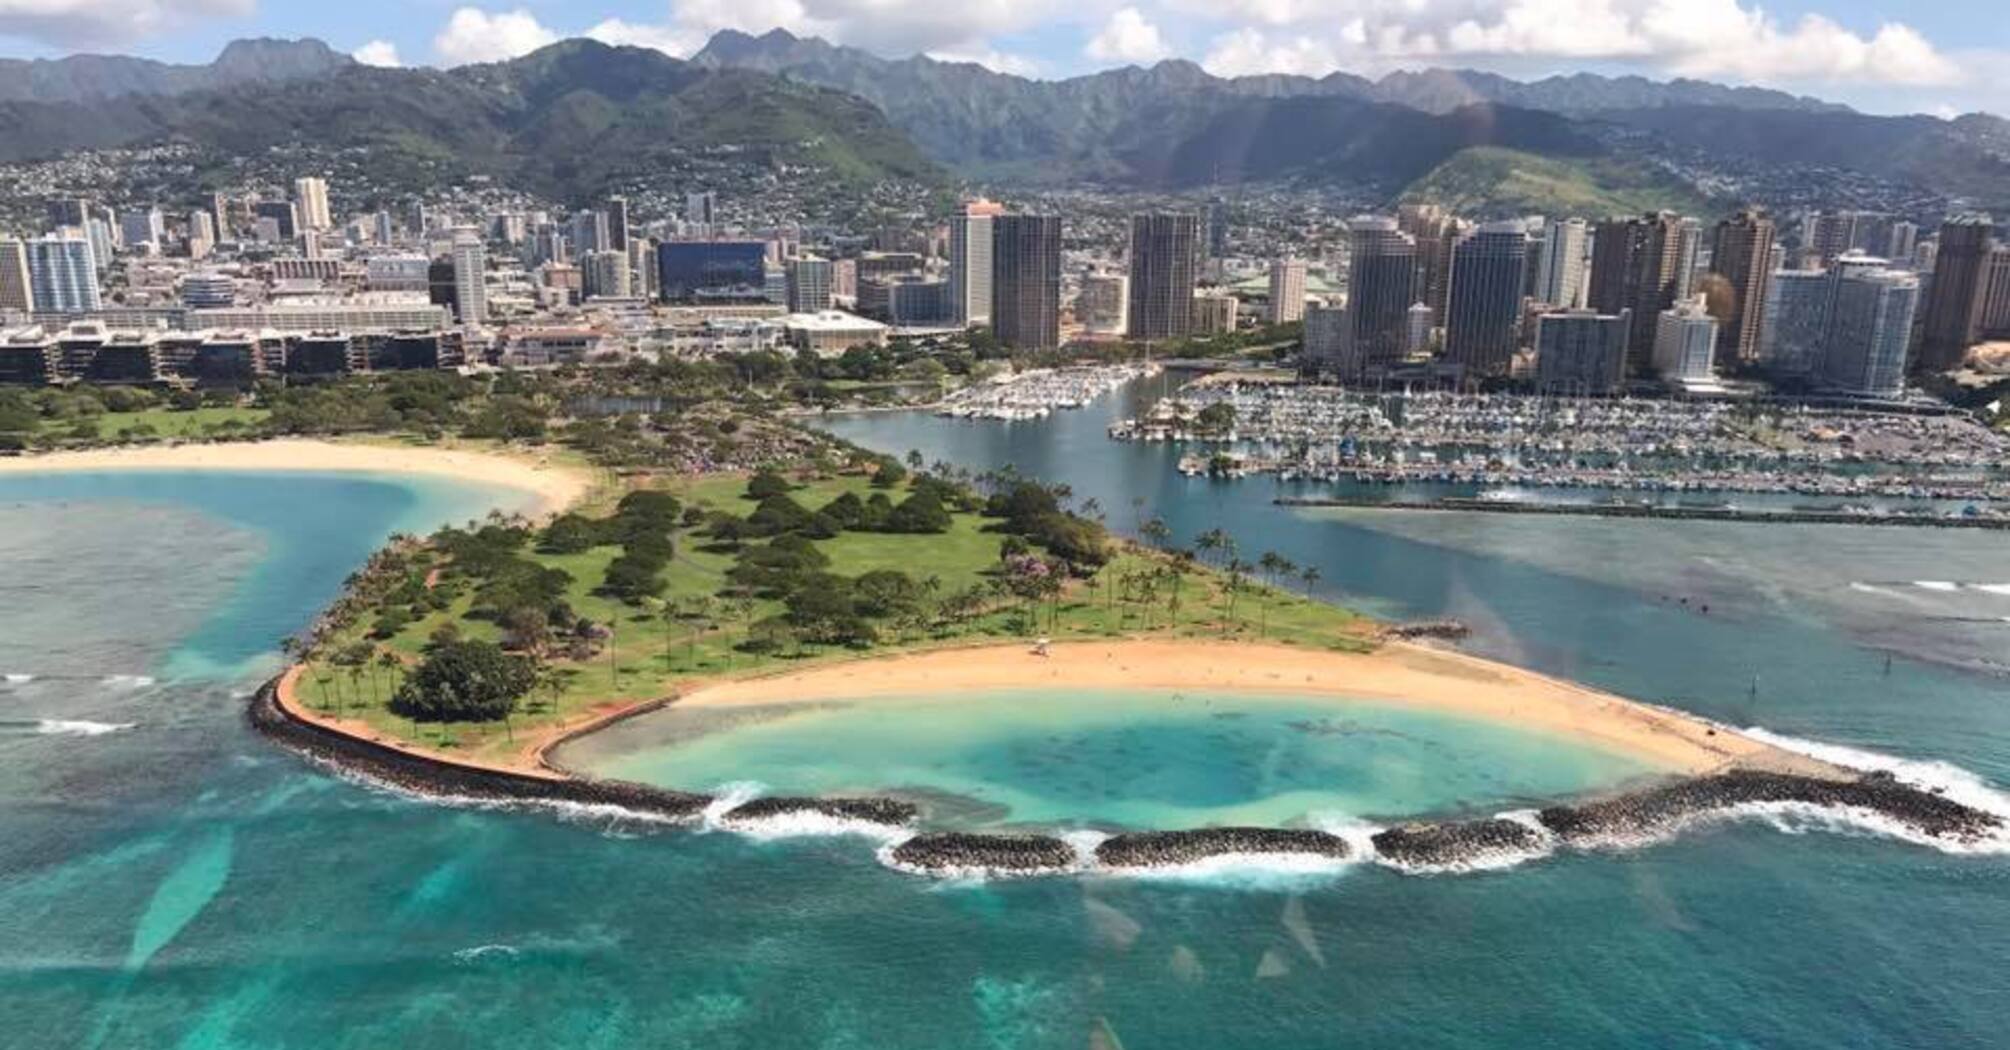 What can surprise tourists on the Hawaiian island of Oahu: tips from locals